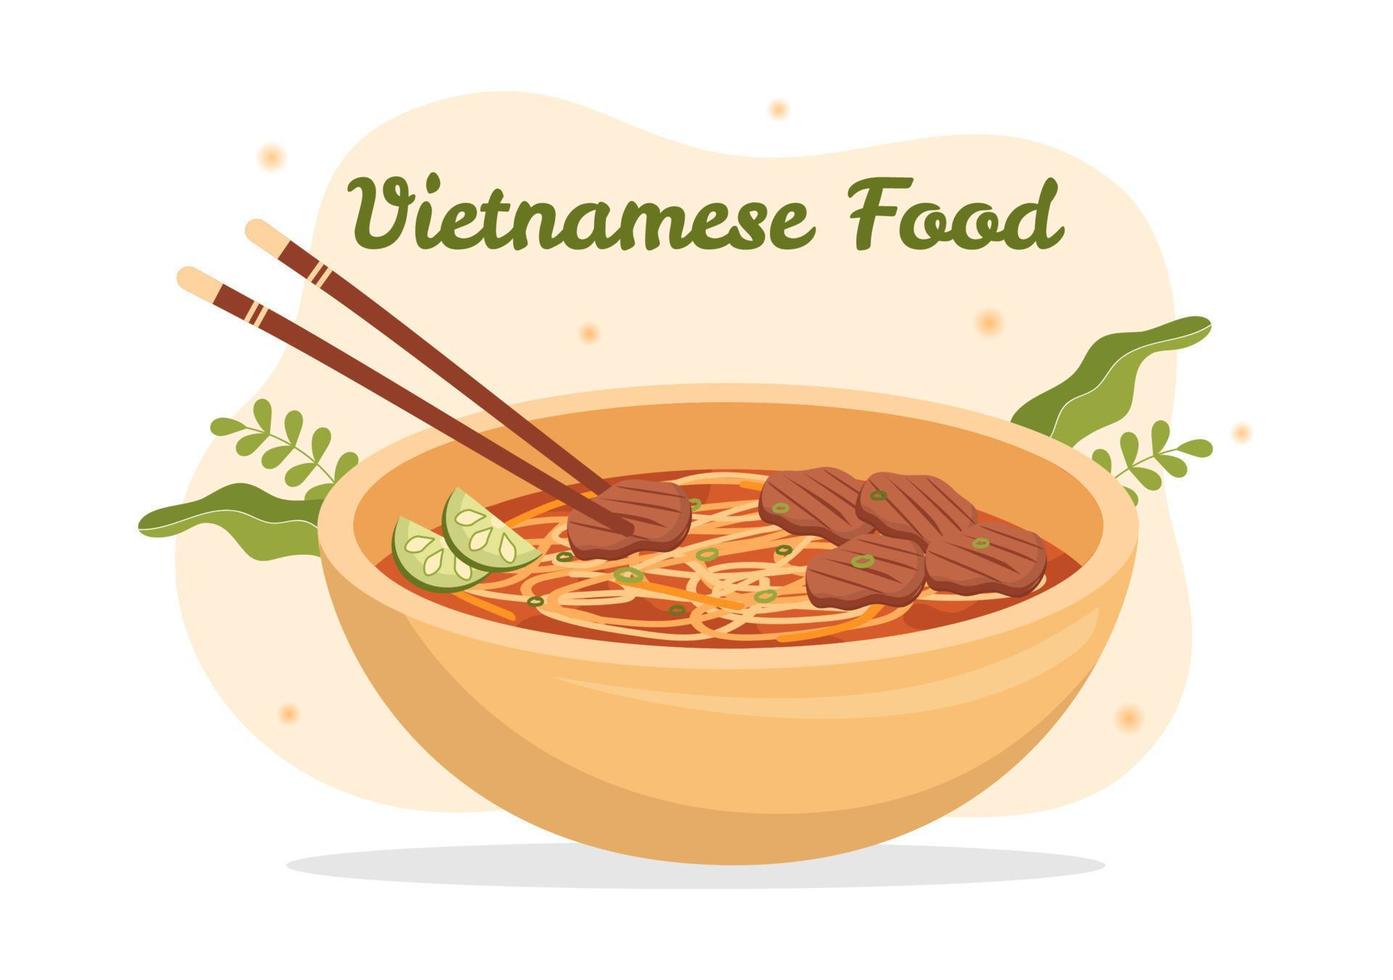 Vietnamese Food Restaurant Menu with Collection of Various Delicious Cuisine Dishes in Flat Style Cartoon Hand Drawn Templates Illustration vector